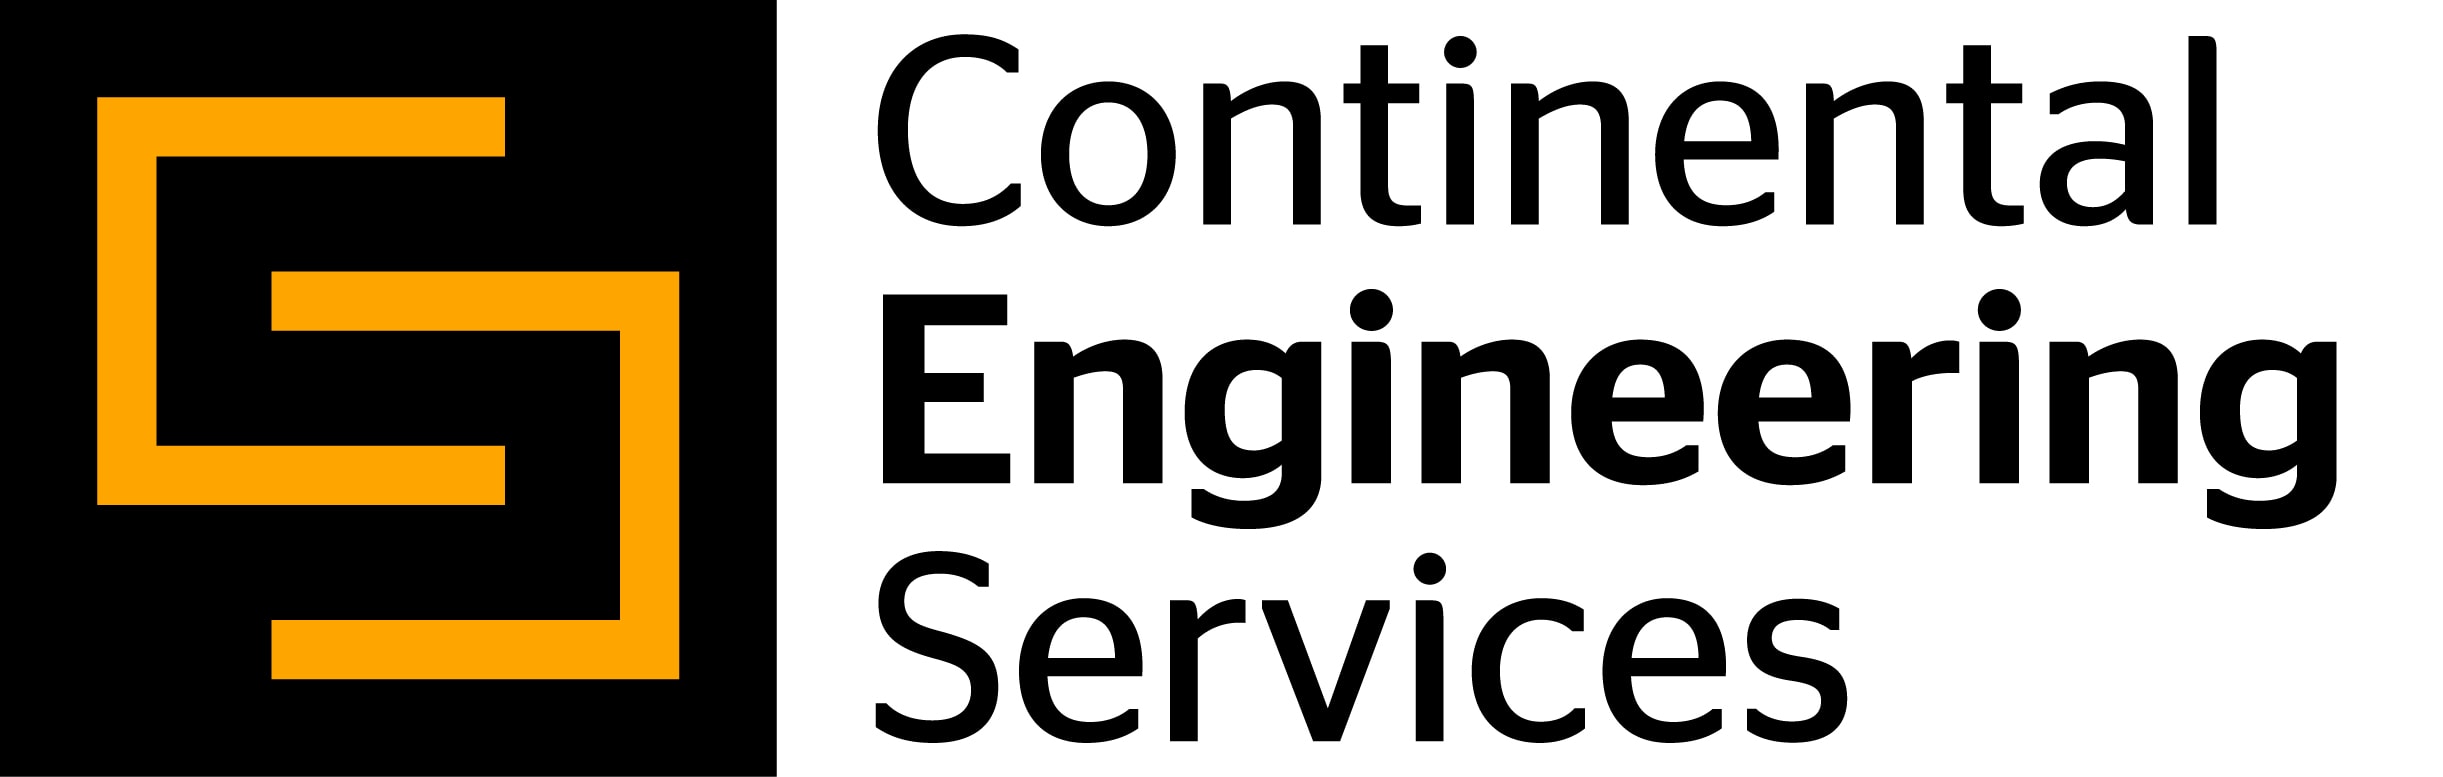 Continental Engineering Services